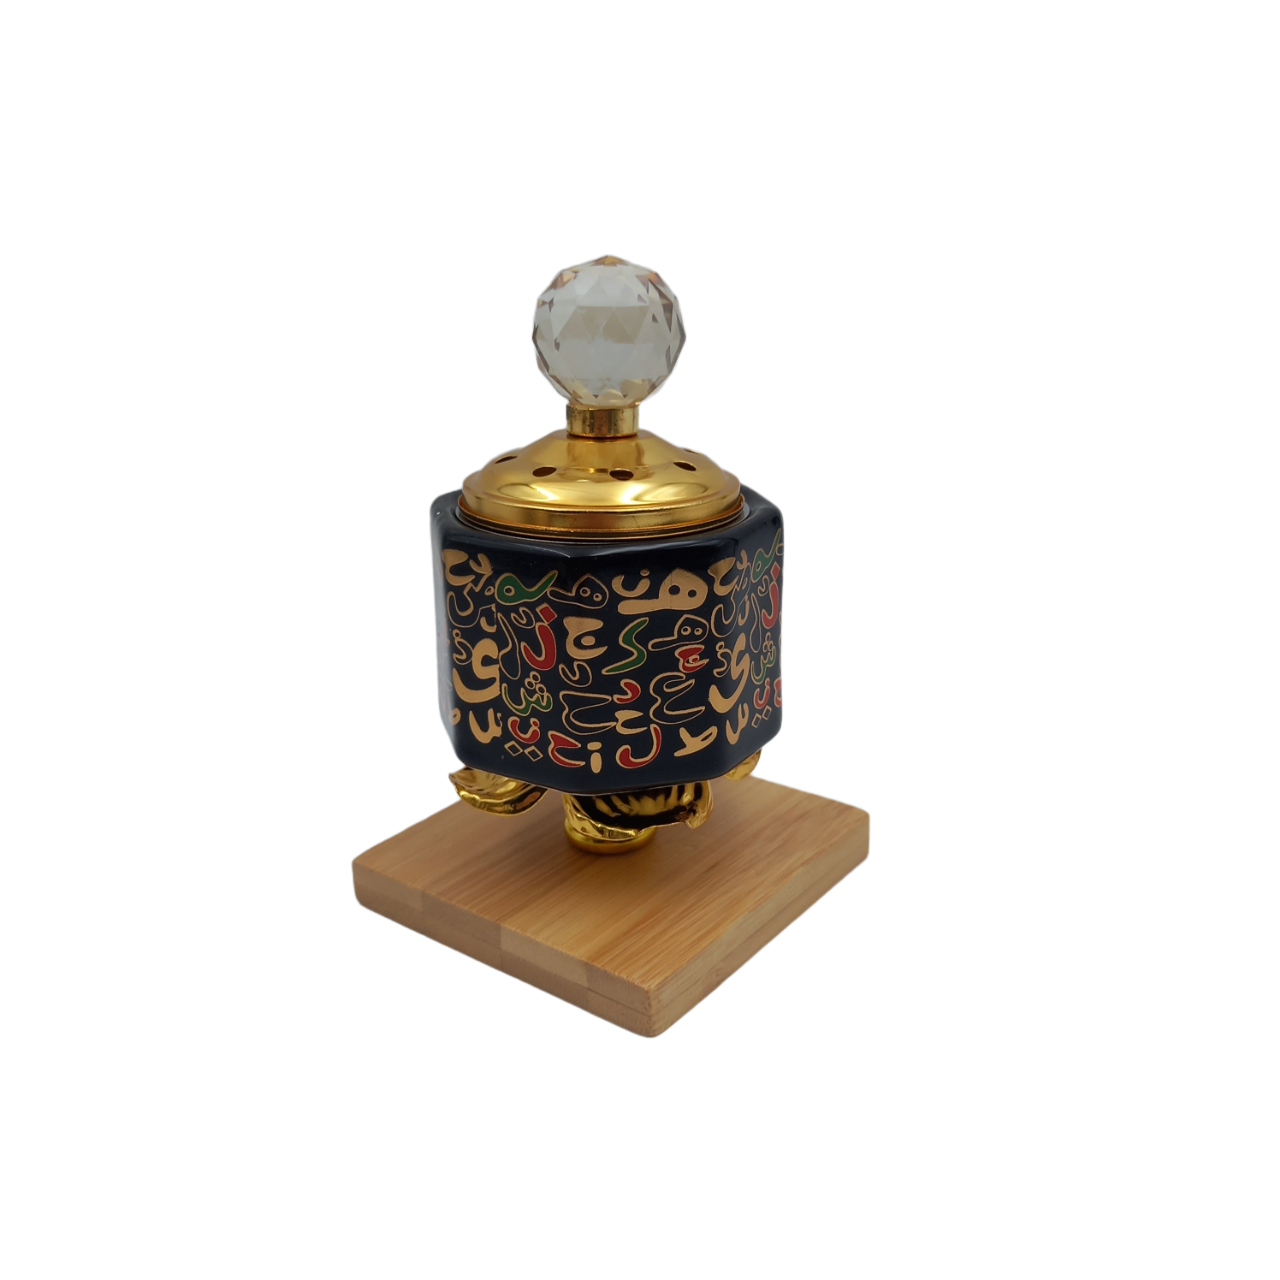 Octagonal Burner with Color Calligraphy on Stand